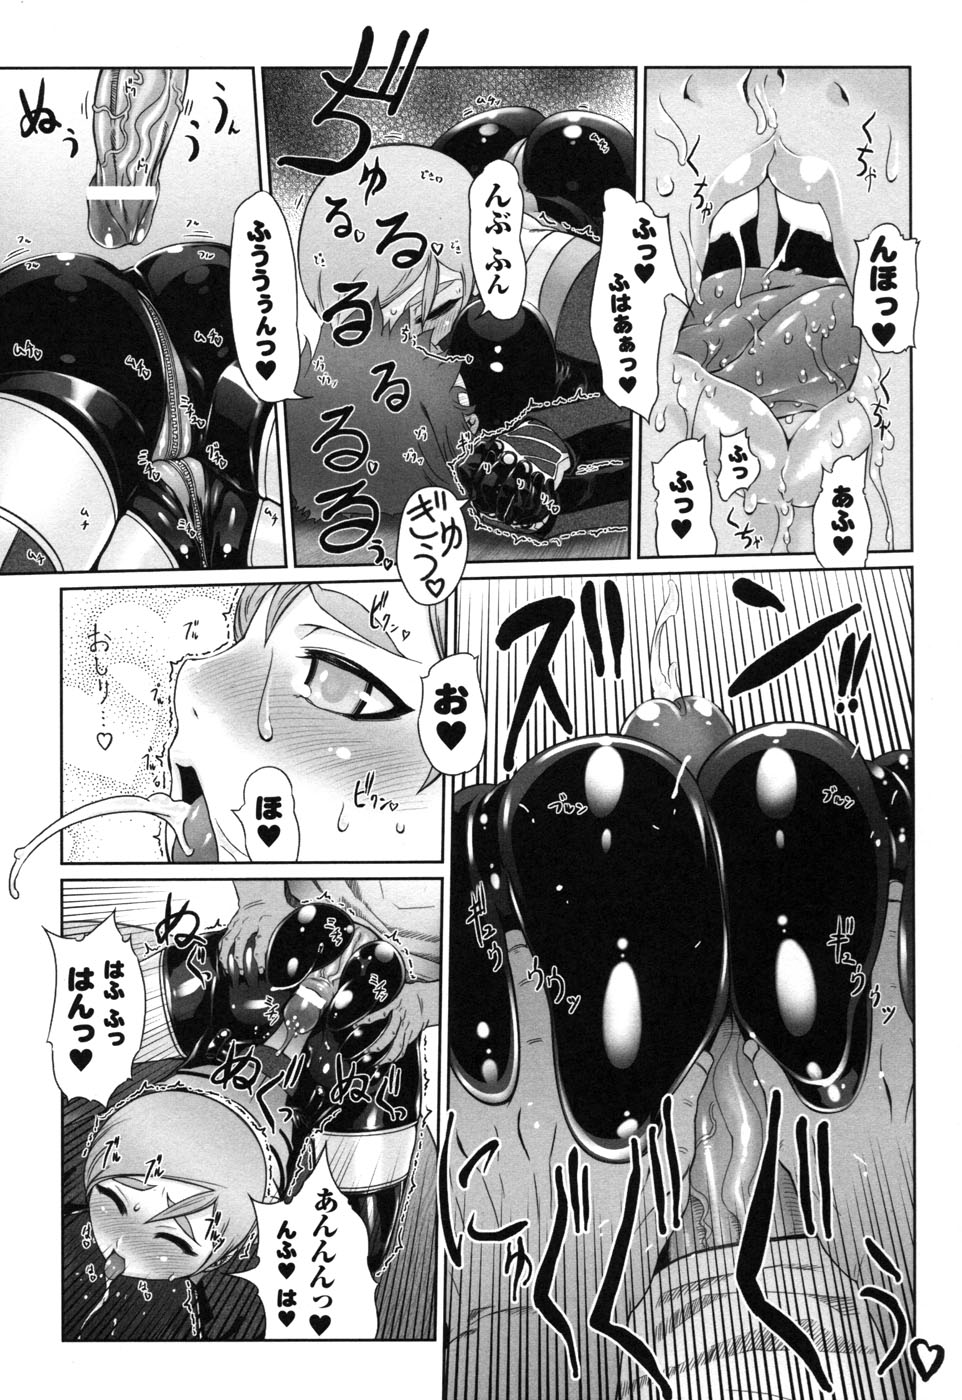 Rider Suit Heroine Anthology Comics 2 page 39 full